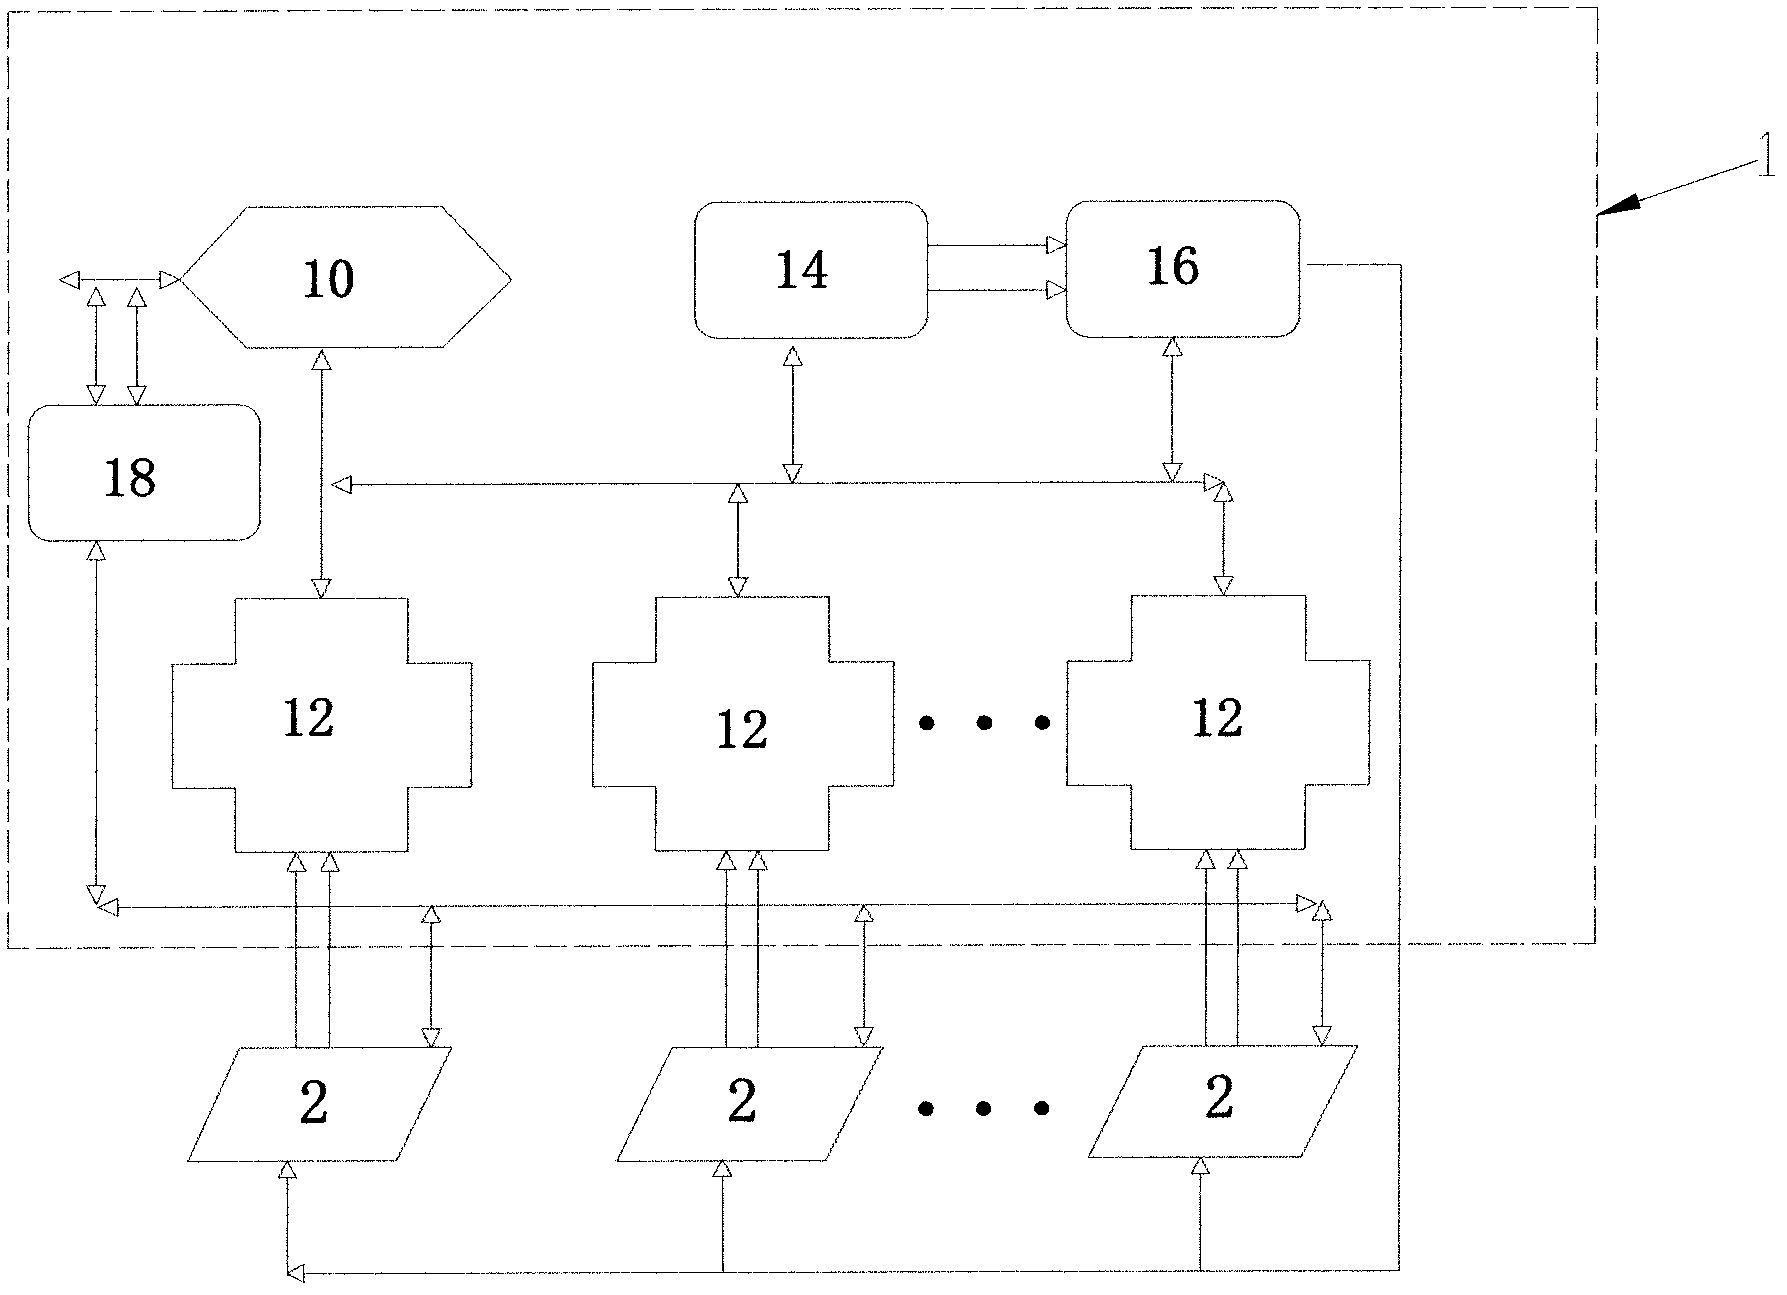 Full-functional multiple-meter-position checking device for voltage monitors